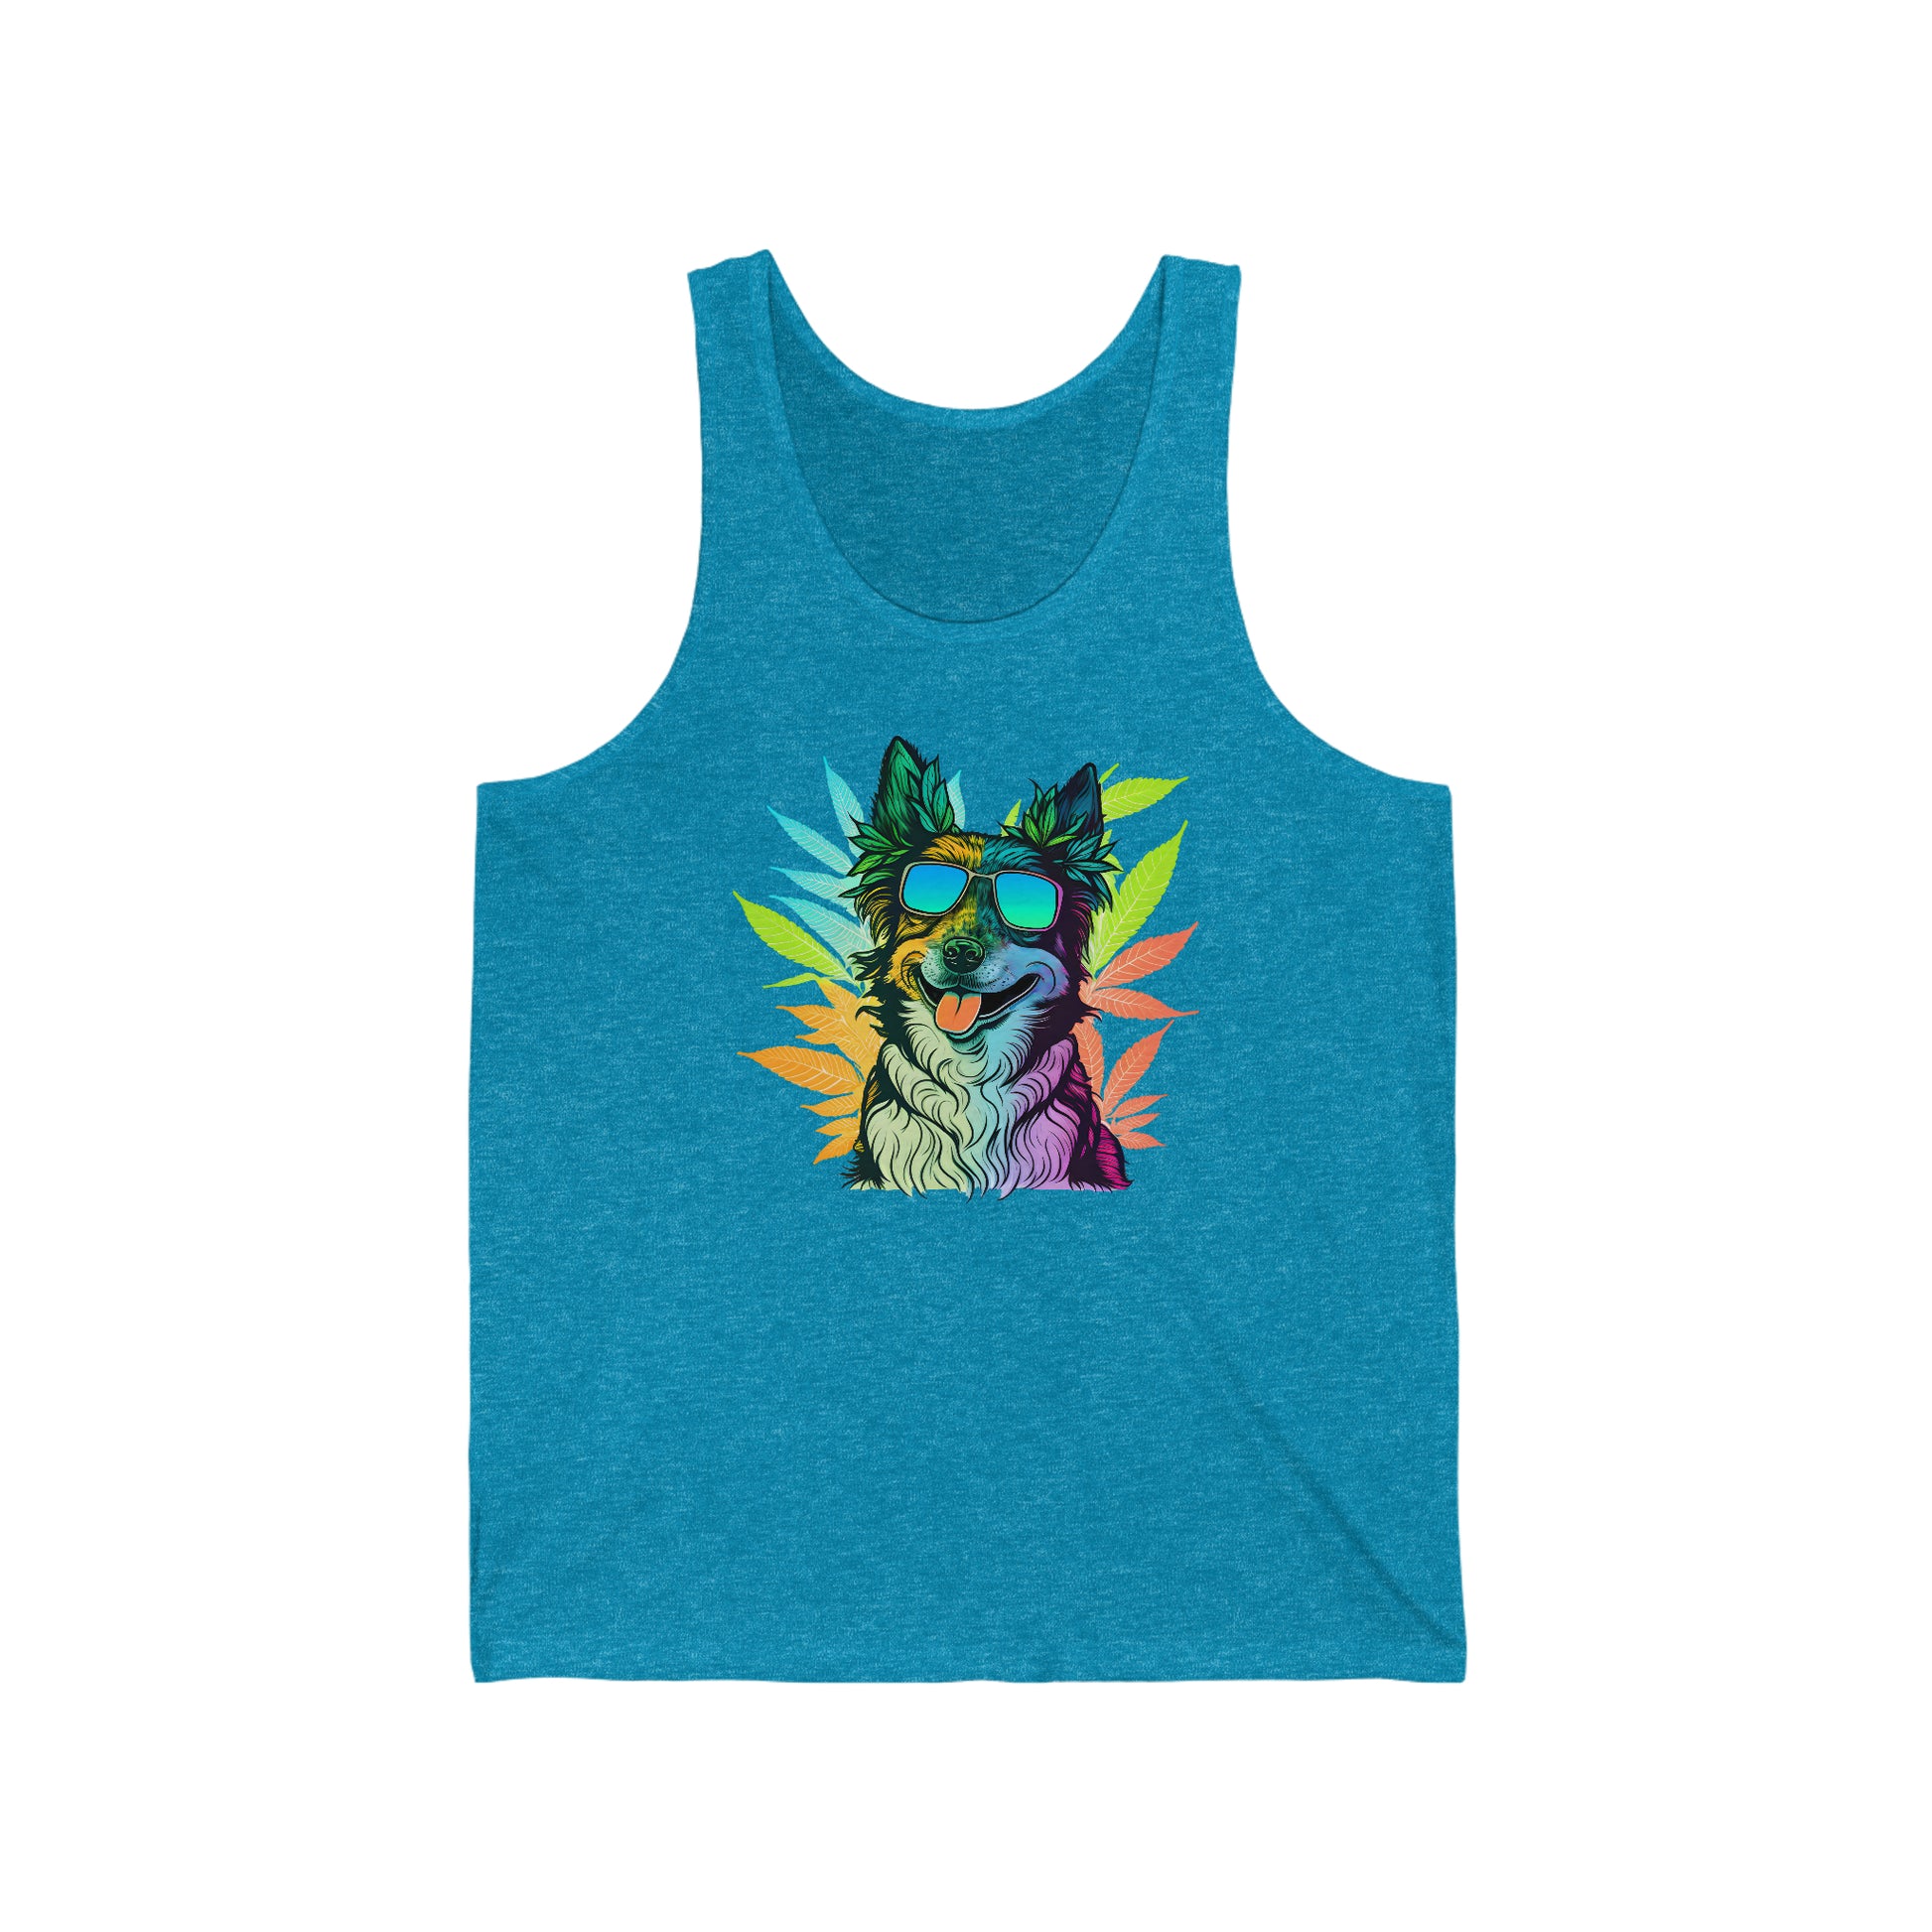 An aqua blue cannabis jersey tank top with a border collie wearing shades and surrounded by cannabis leaves